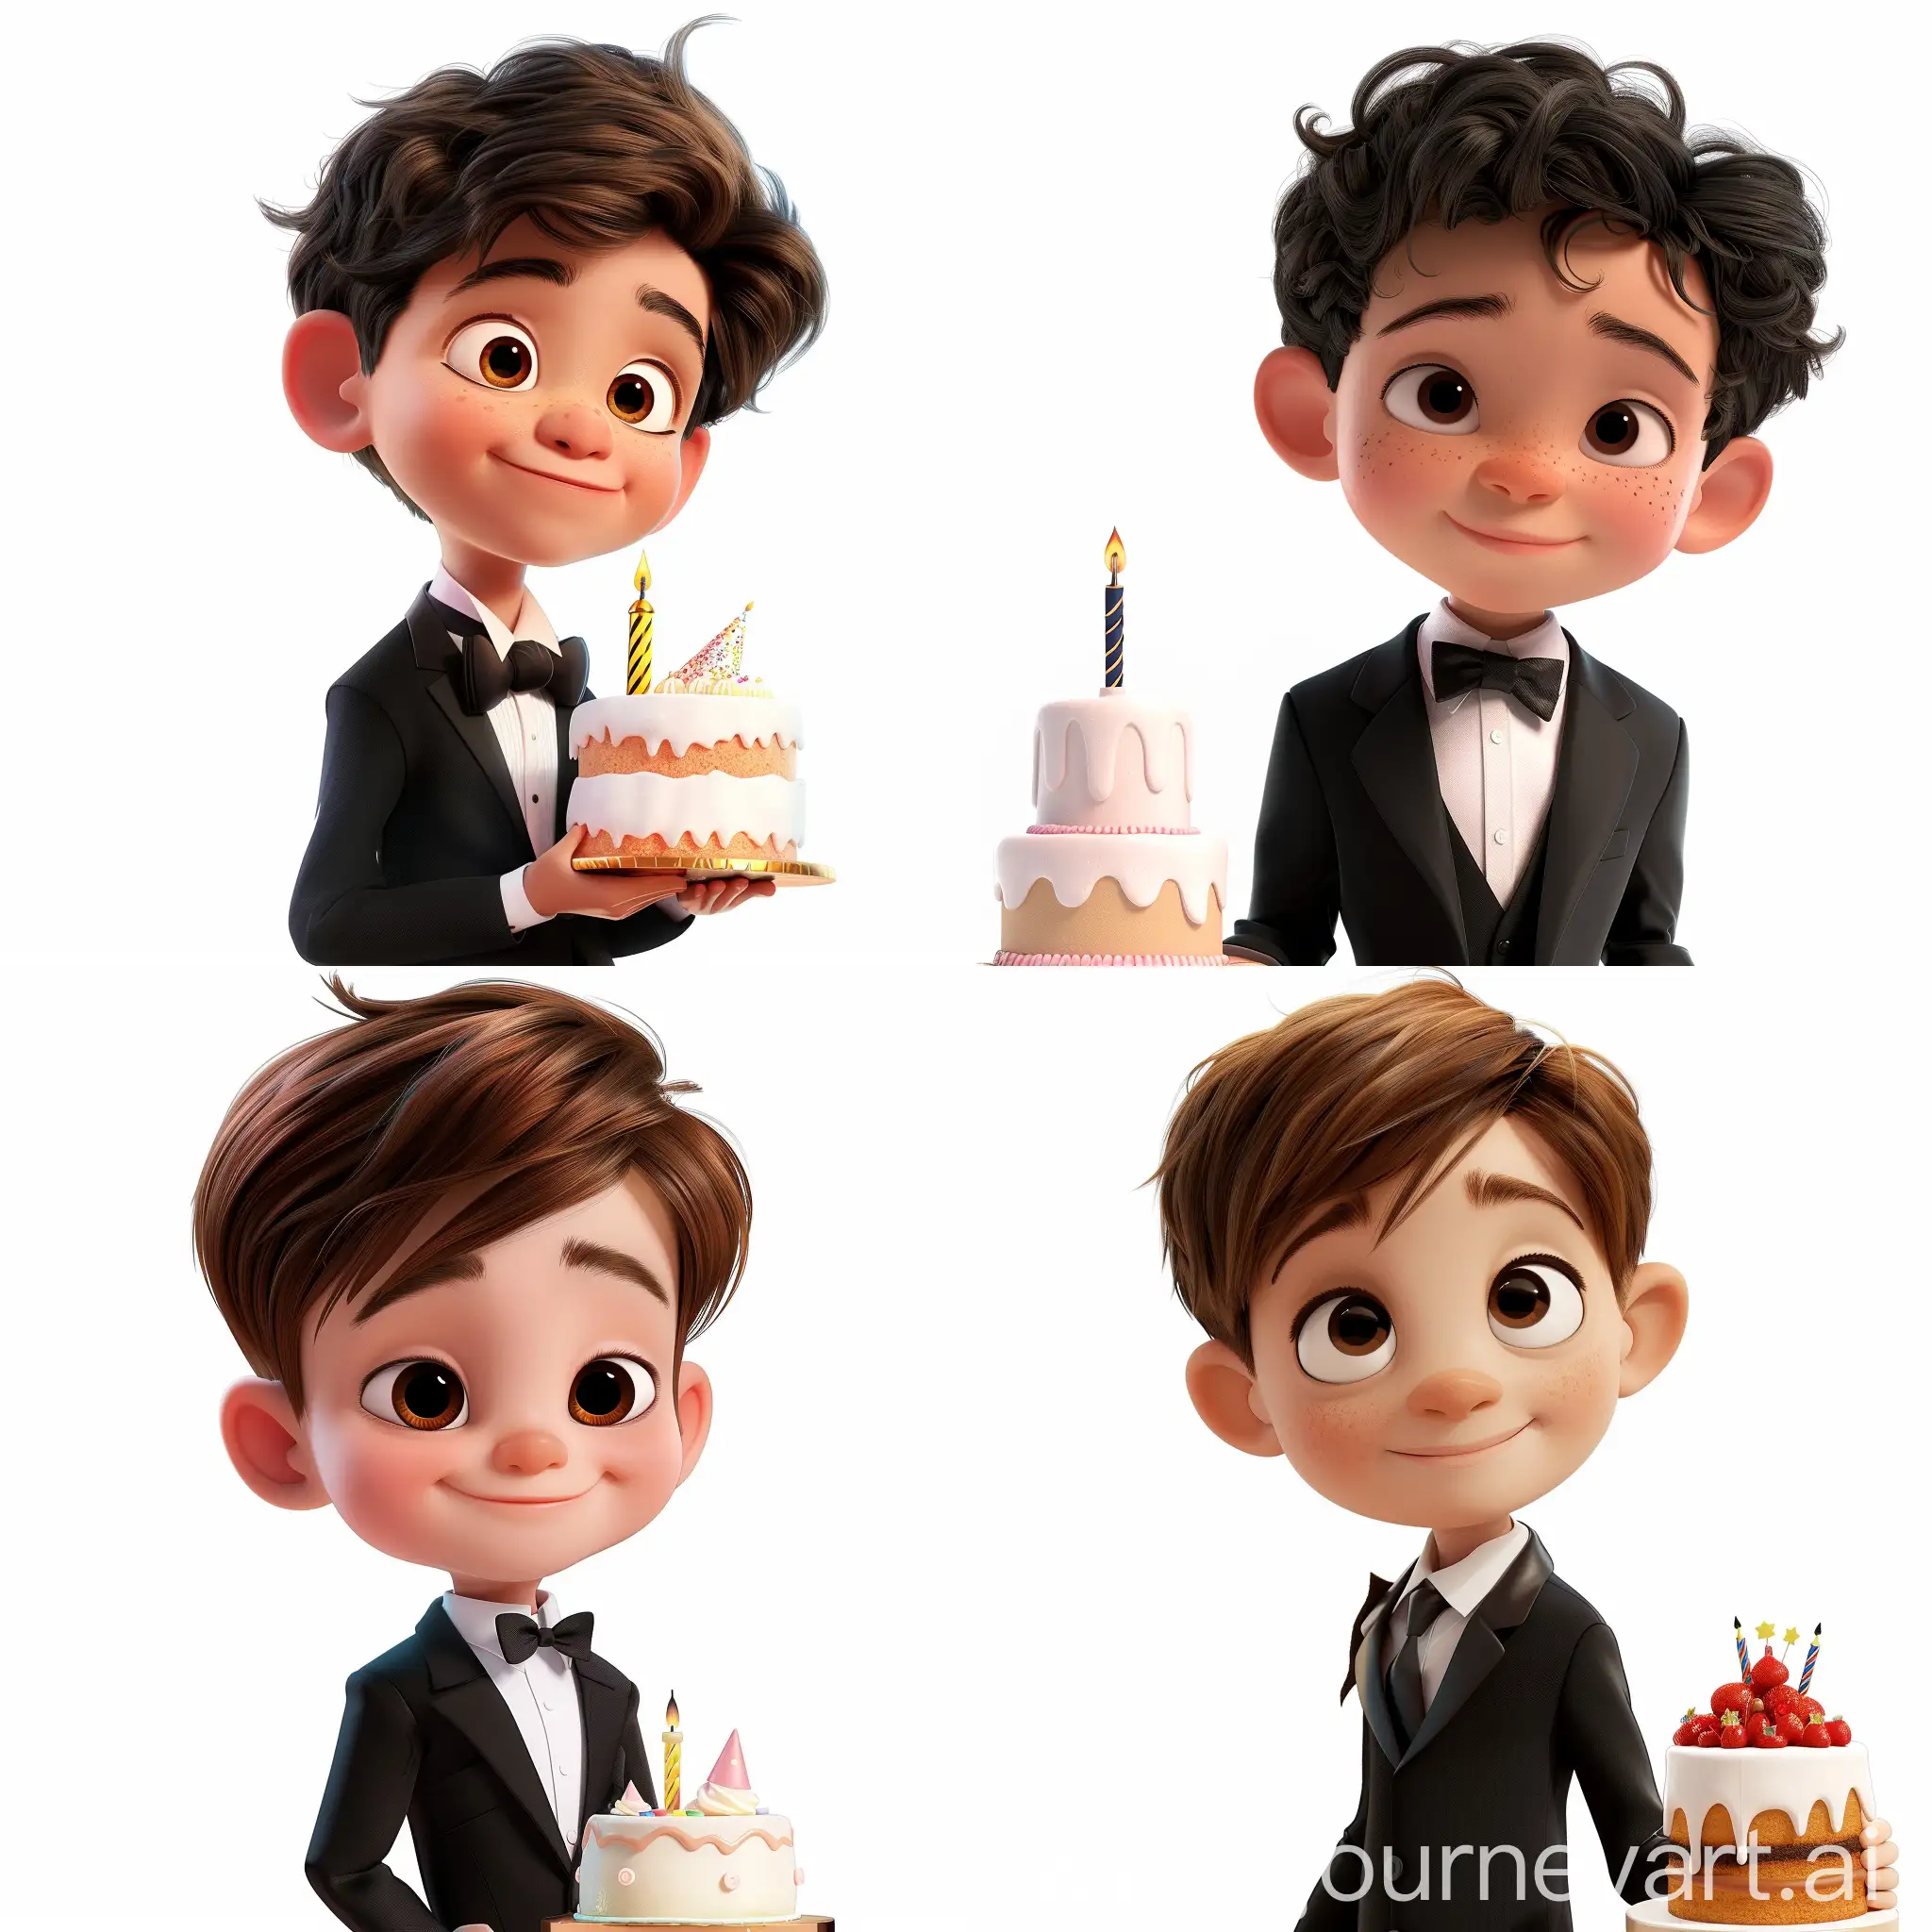 Cheerful-Young-Boy-with-Birthday-Cake-in-Formal-Attire